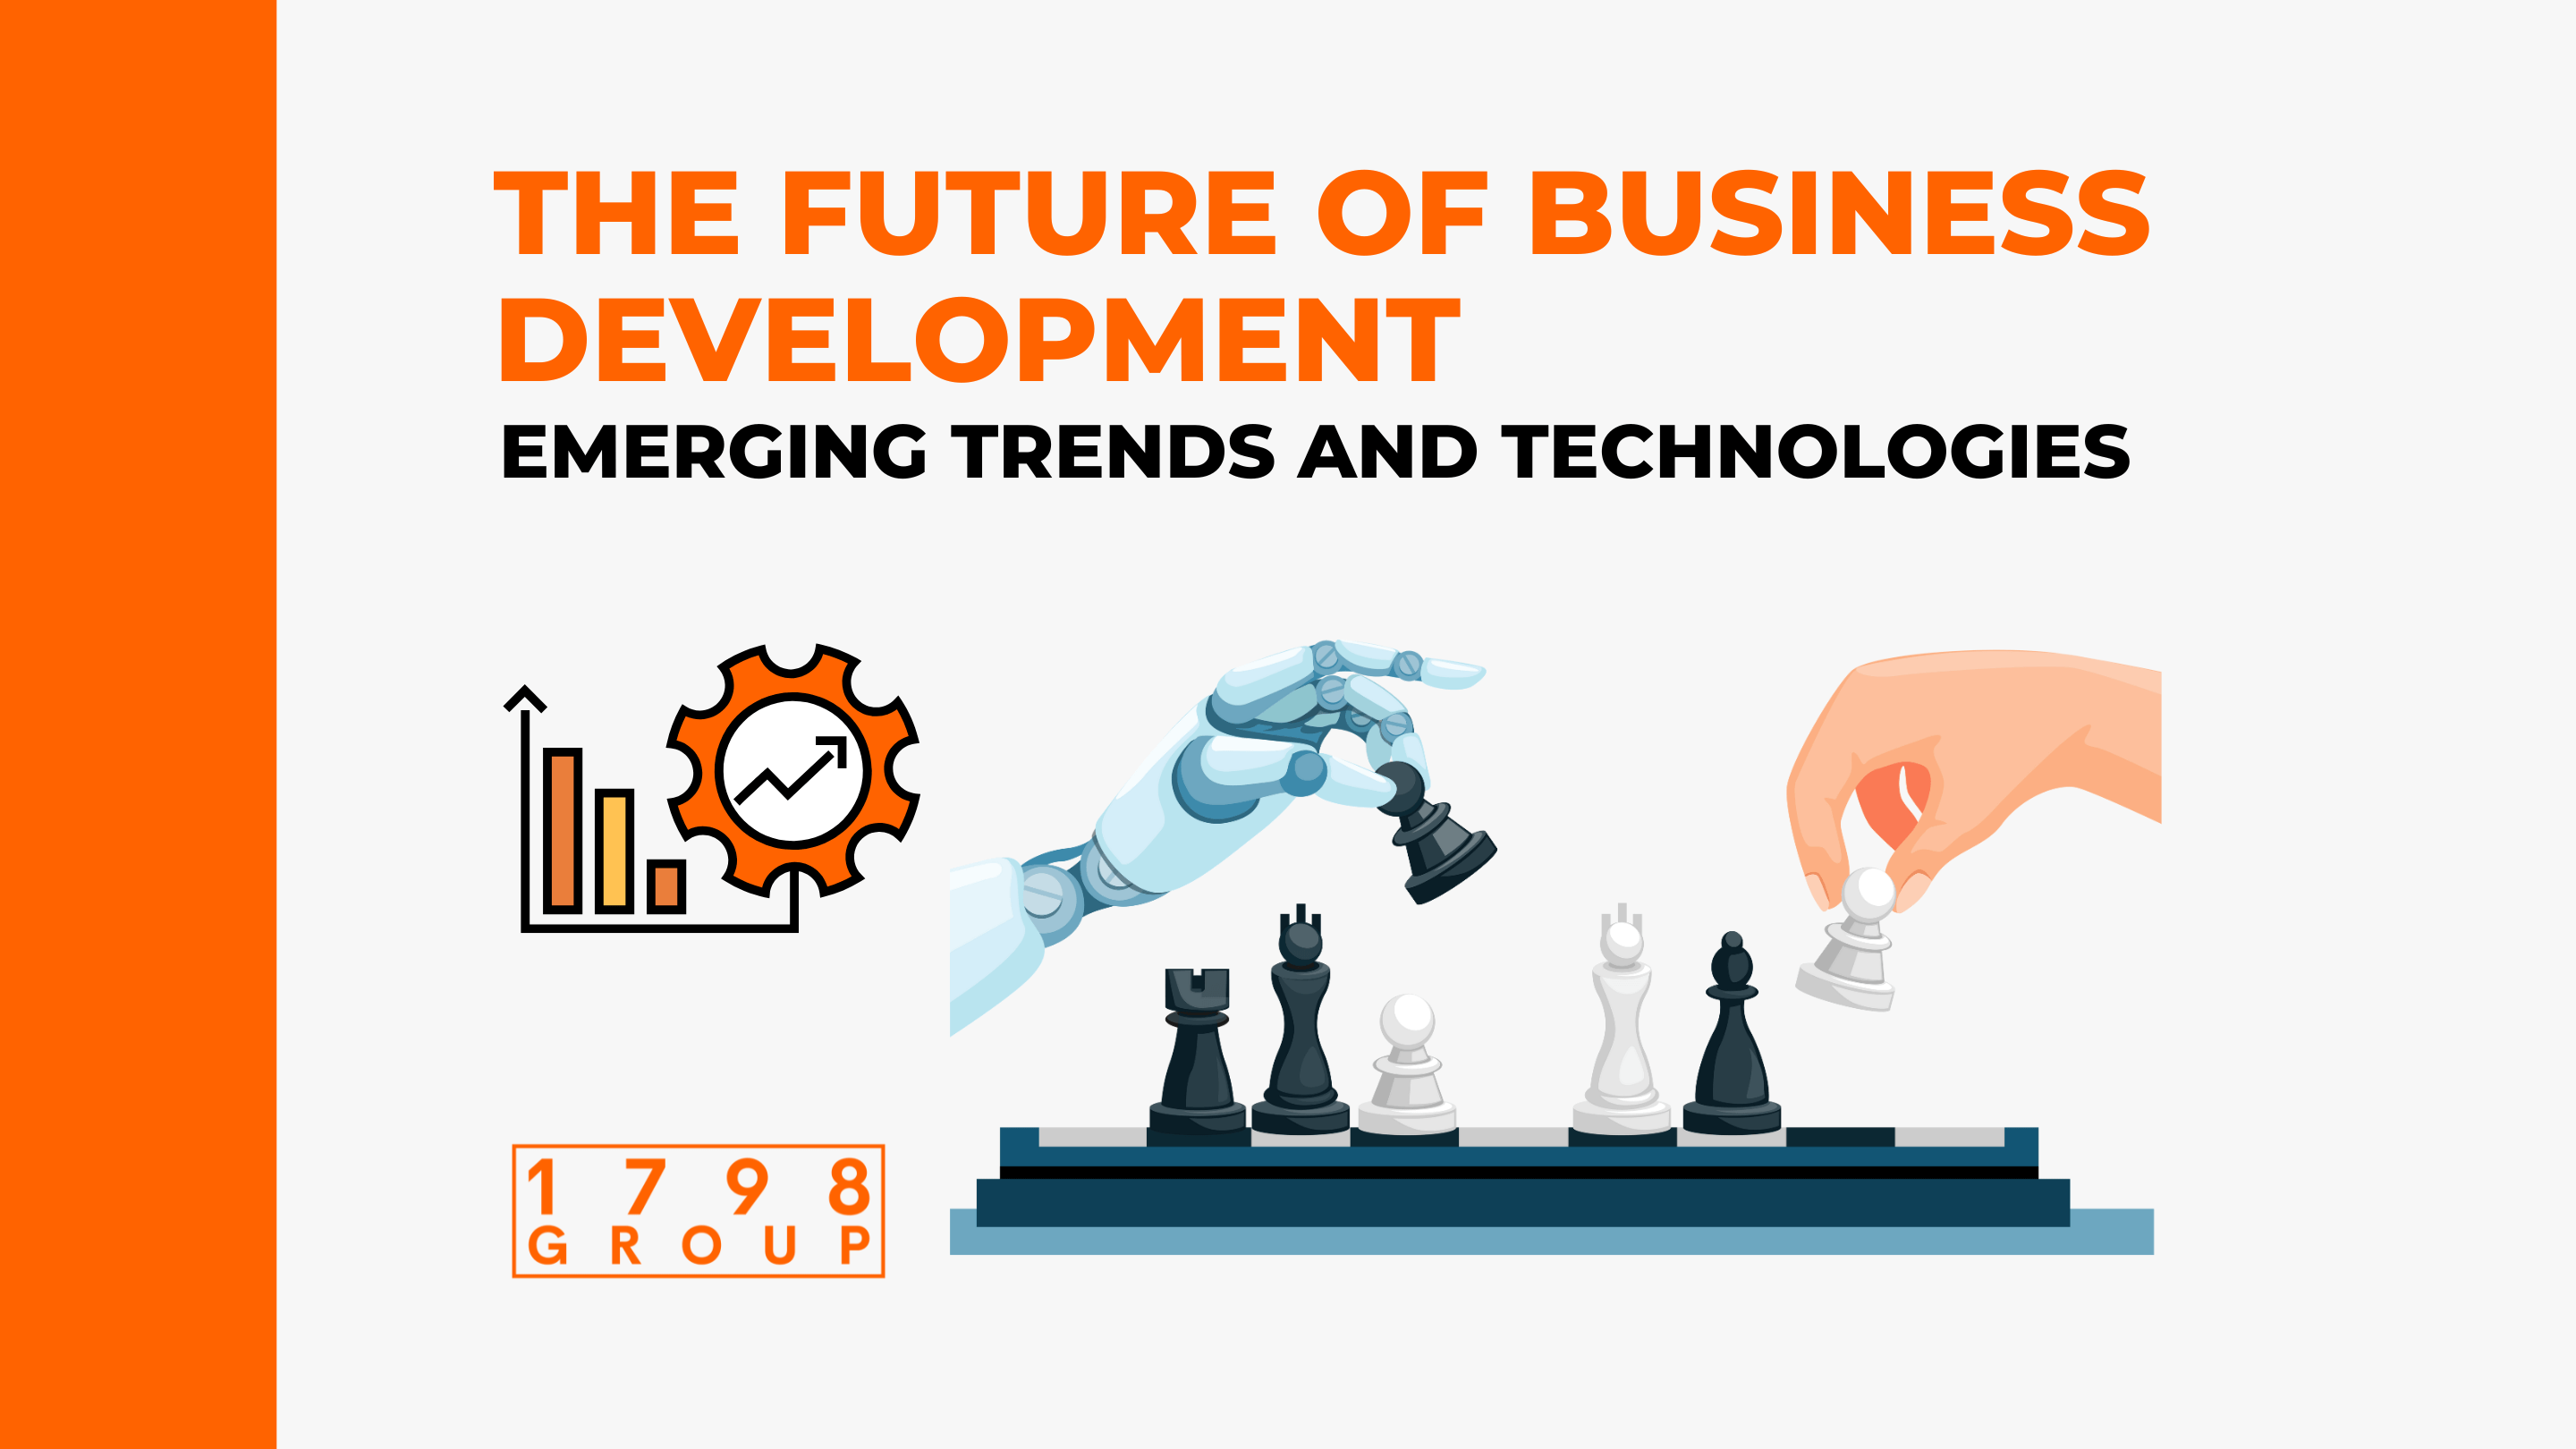 The Future of Business Development Emerging Trends and Technologies